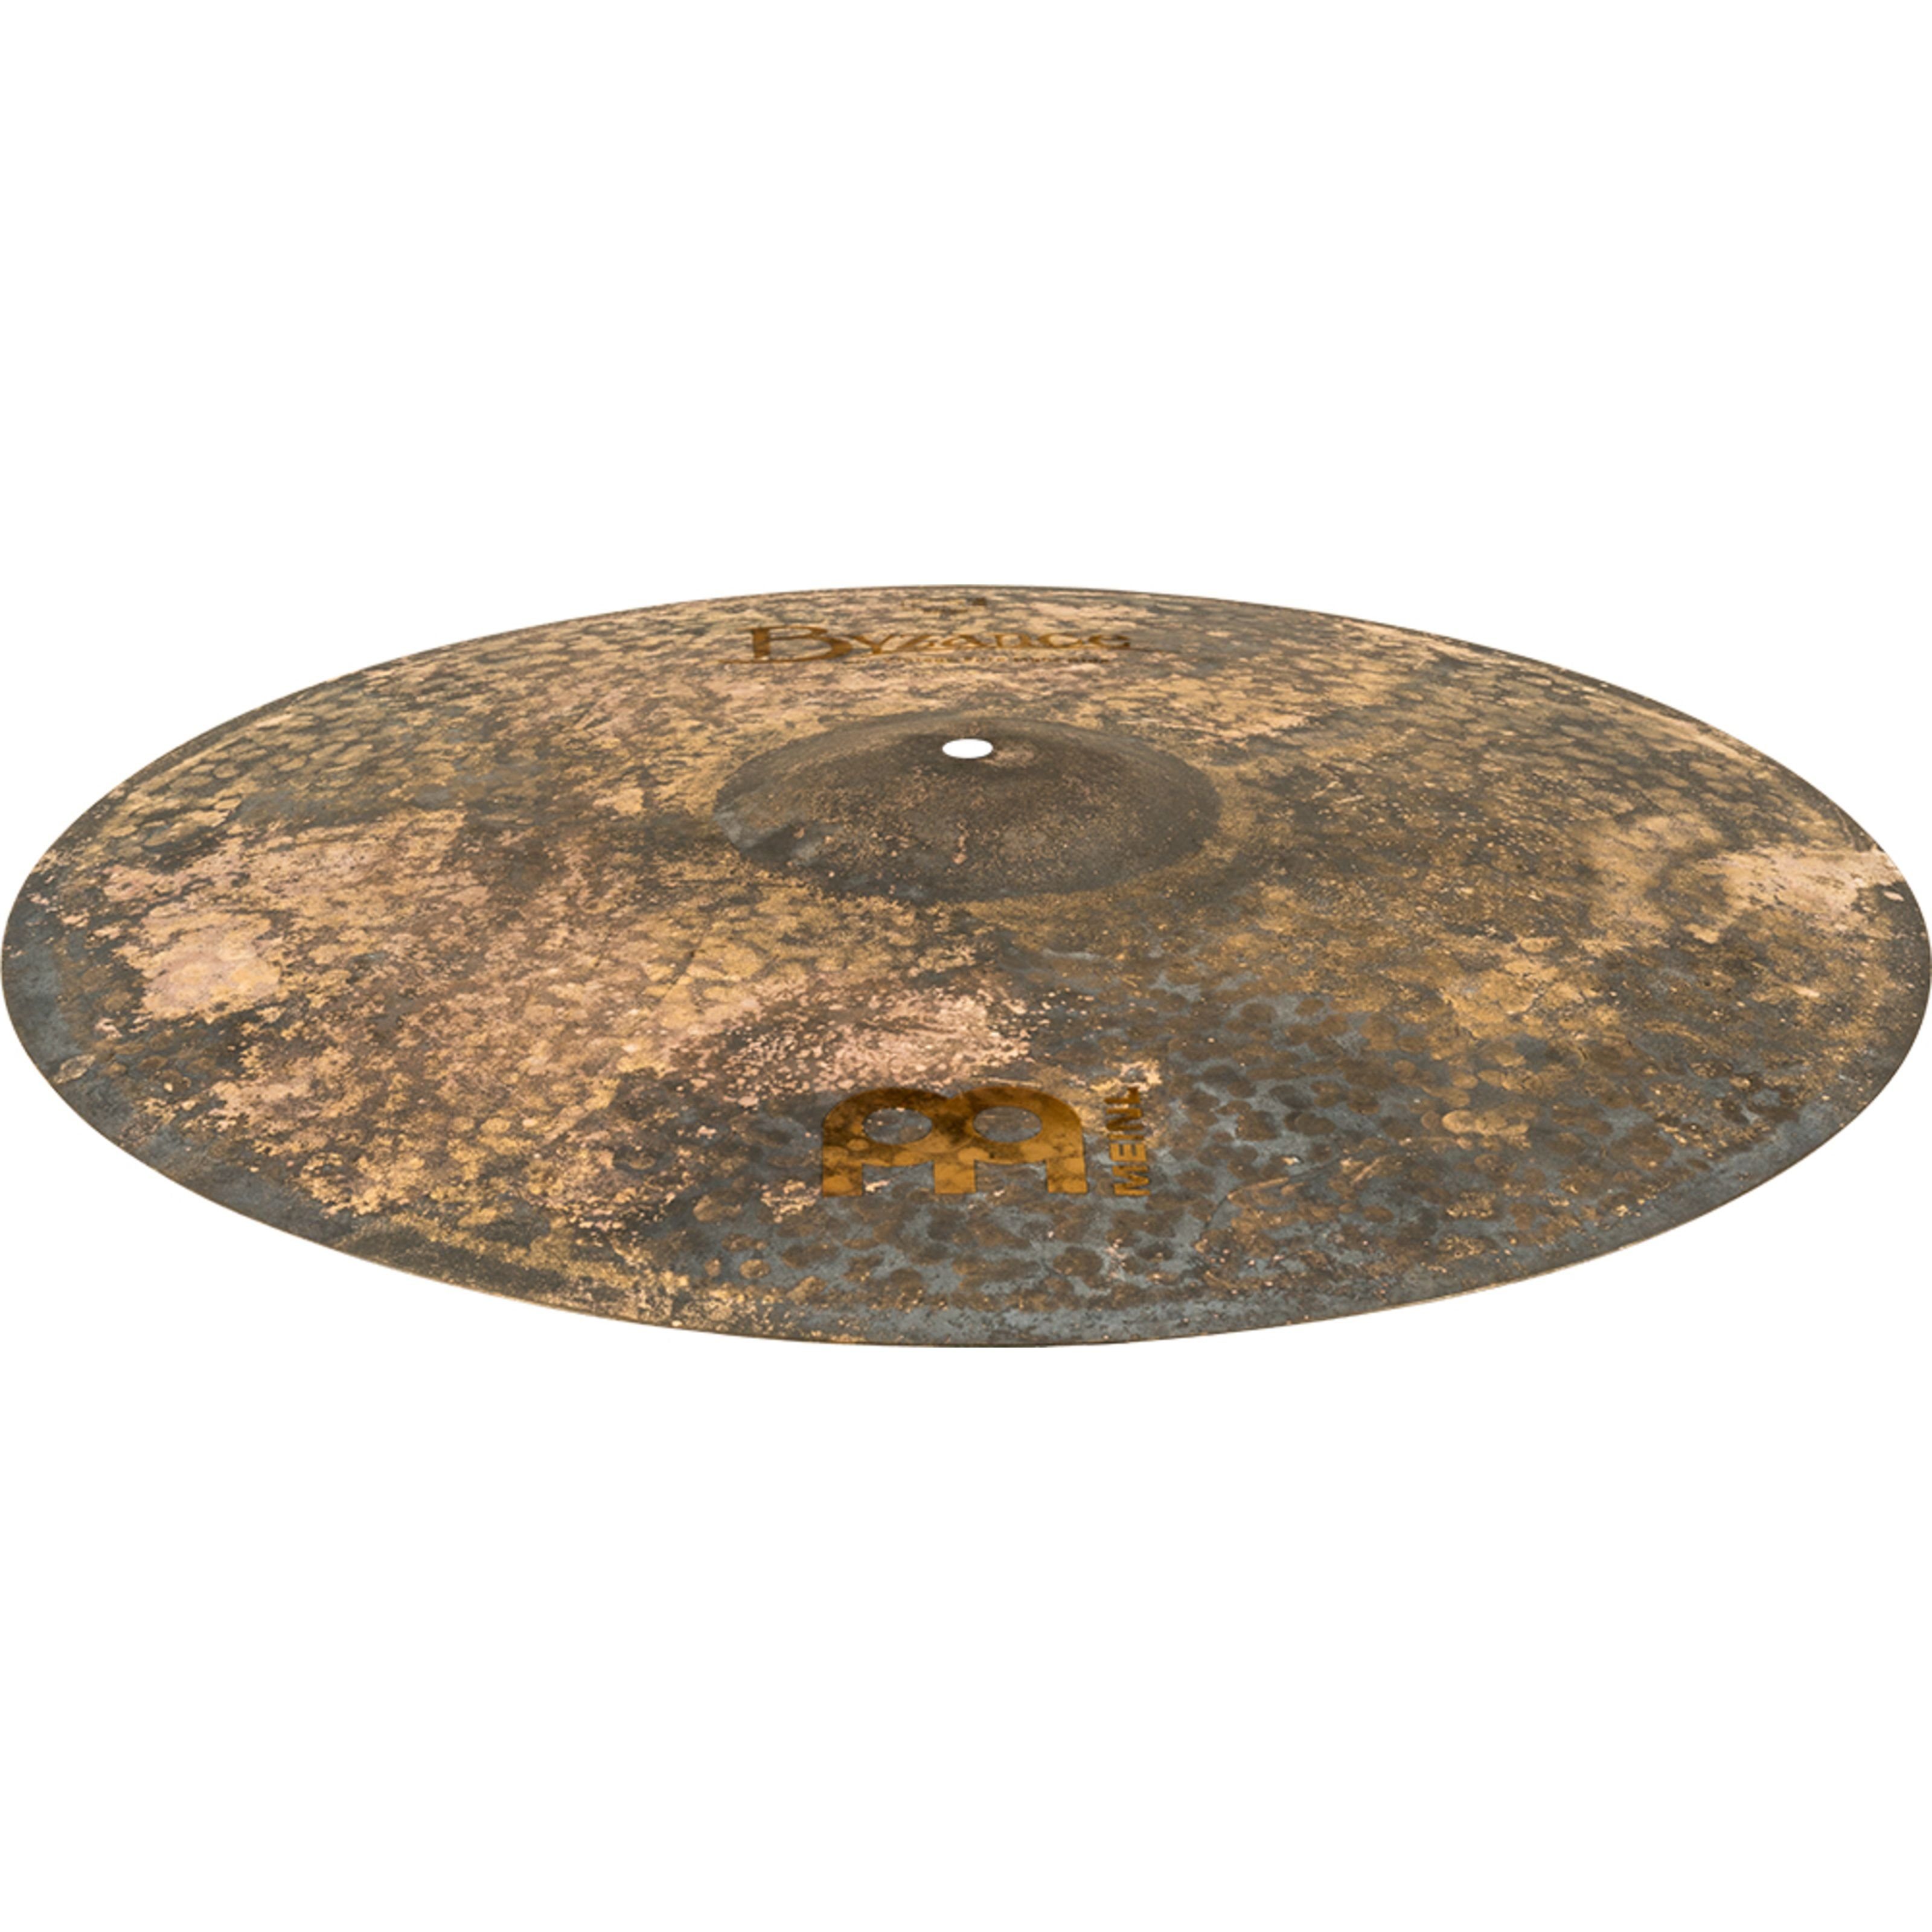 Spielzeug-Musikinstrument, Pure Ride - Vintage Cymbal Ride Percussion B20VPLR, 20", Byzance Meinl Light